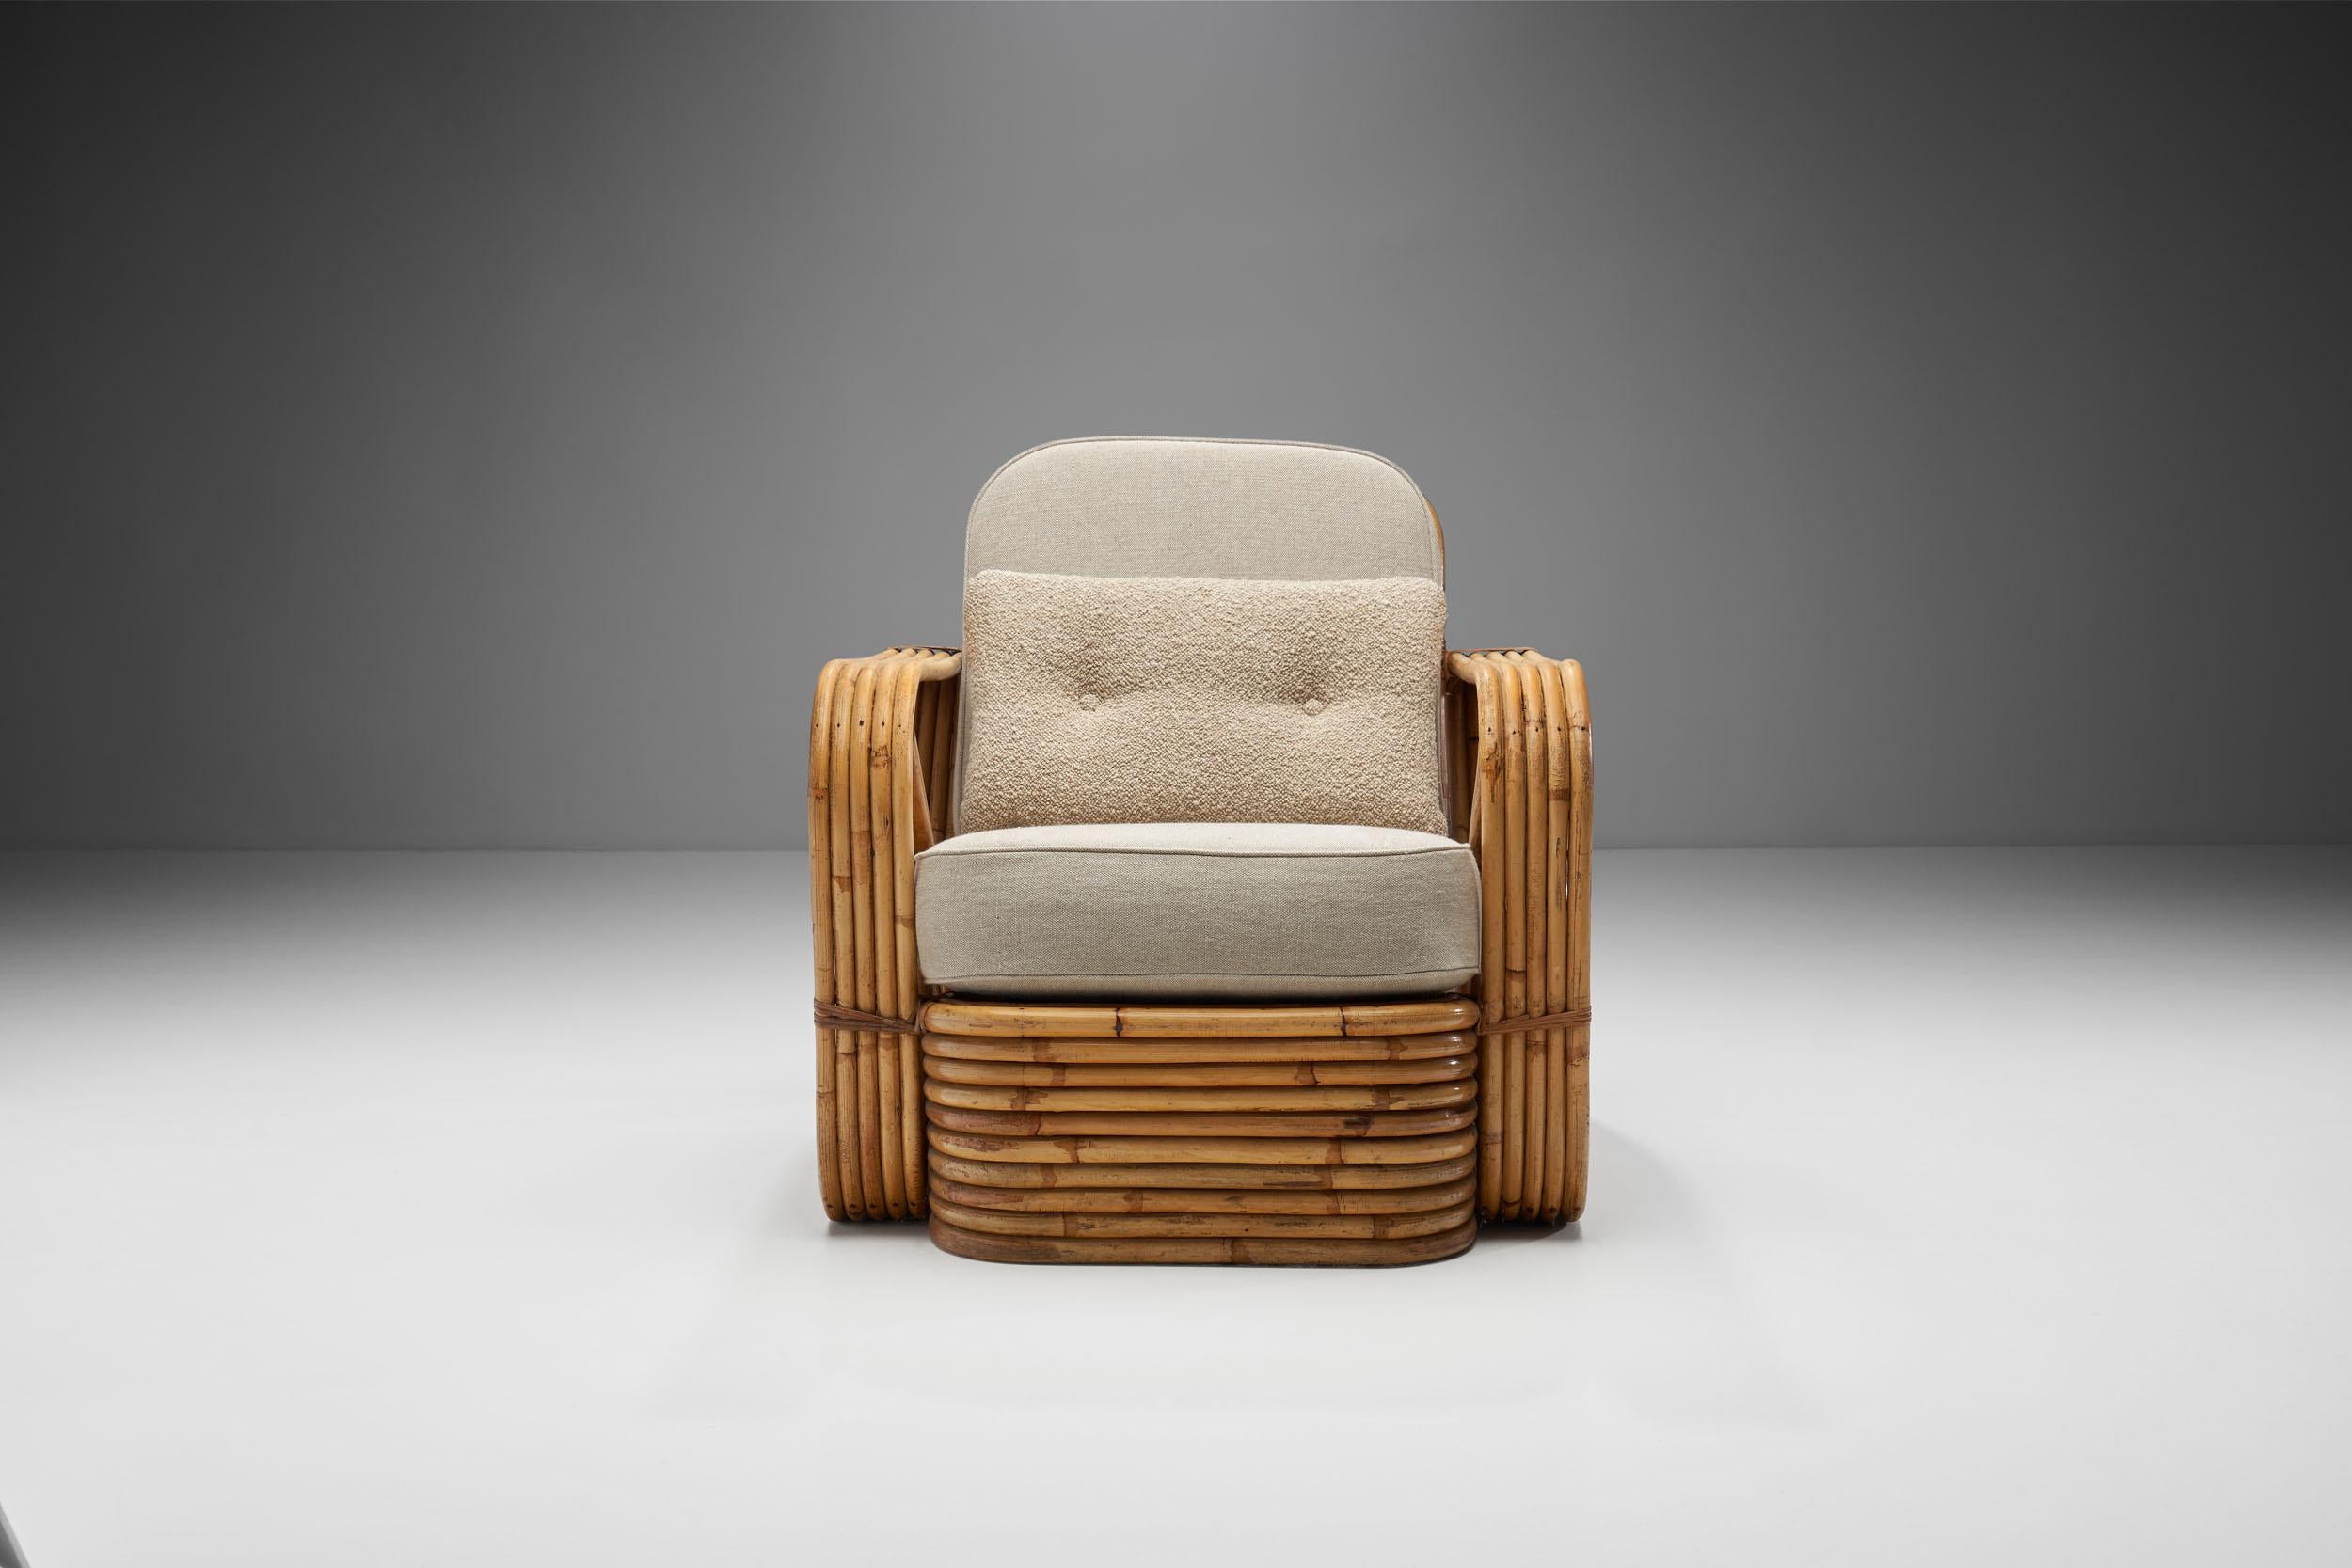 Mid-20th Century Rattan Lounge Chair in the Style of Paul Frankl, United States, 1940s